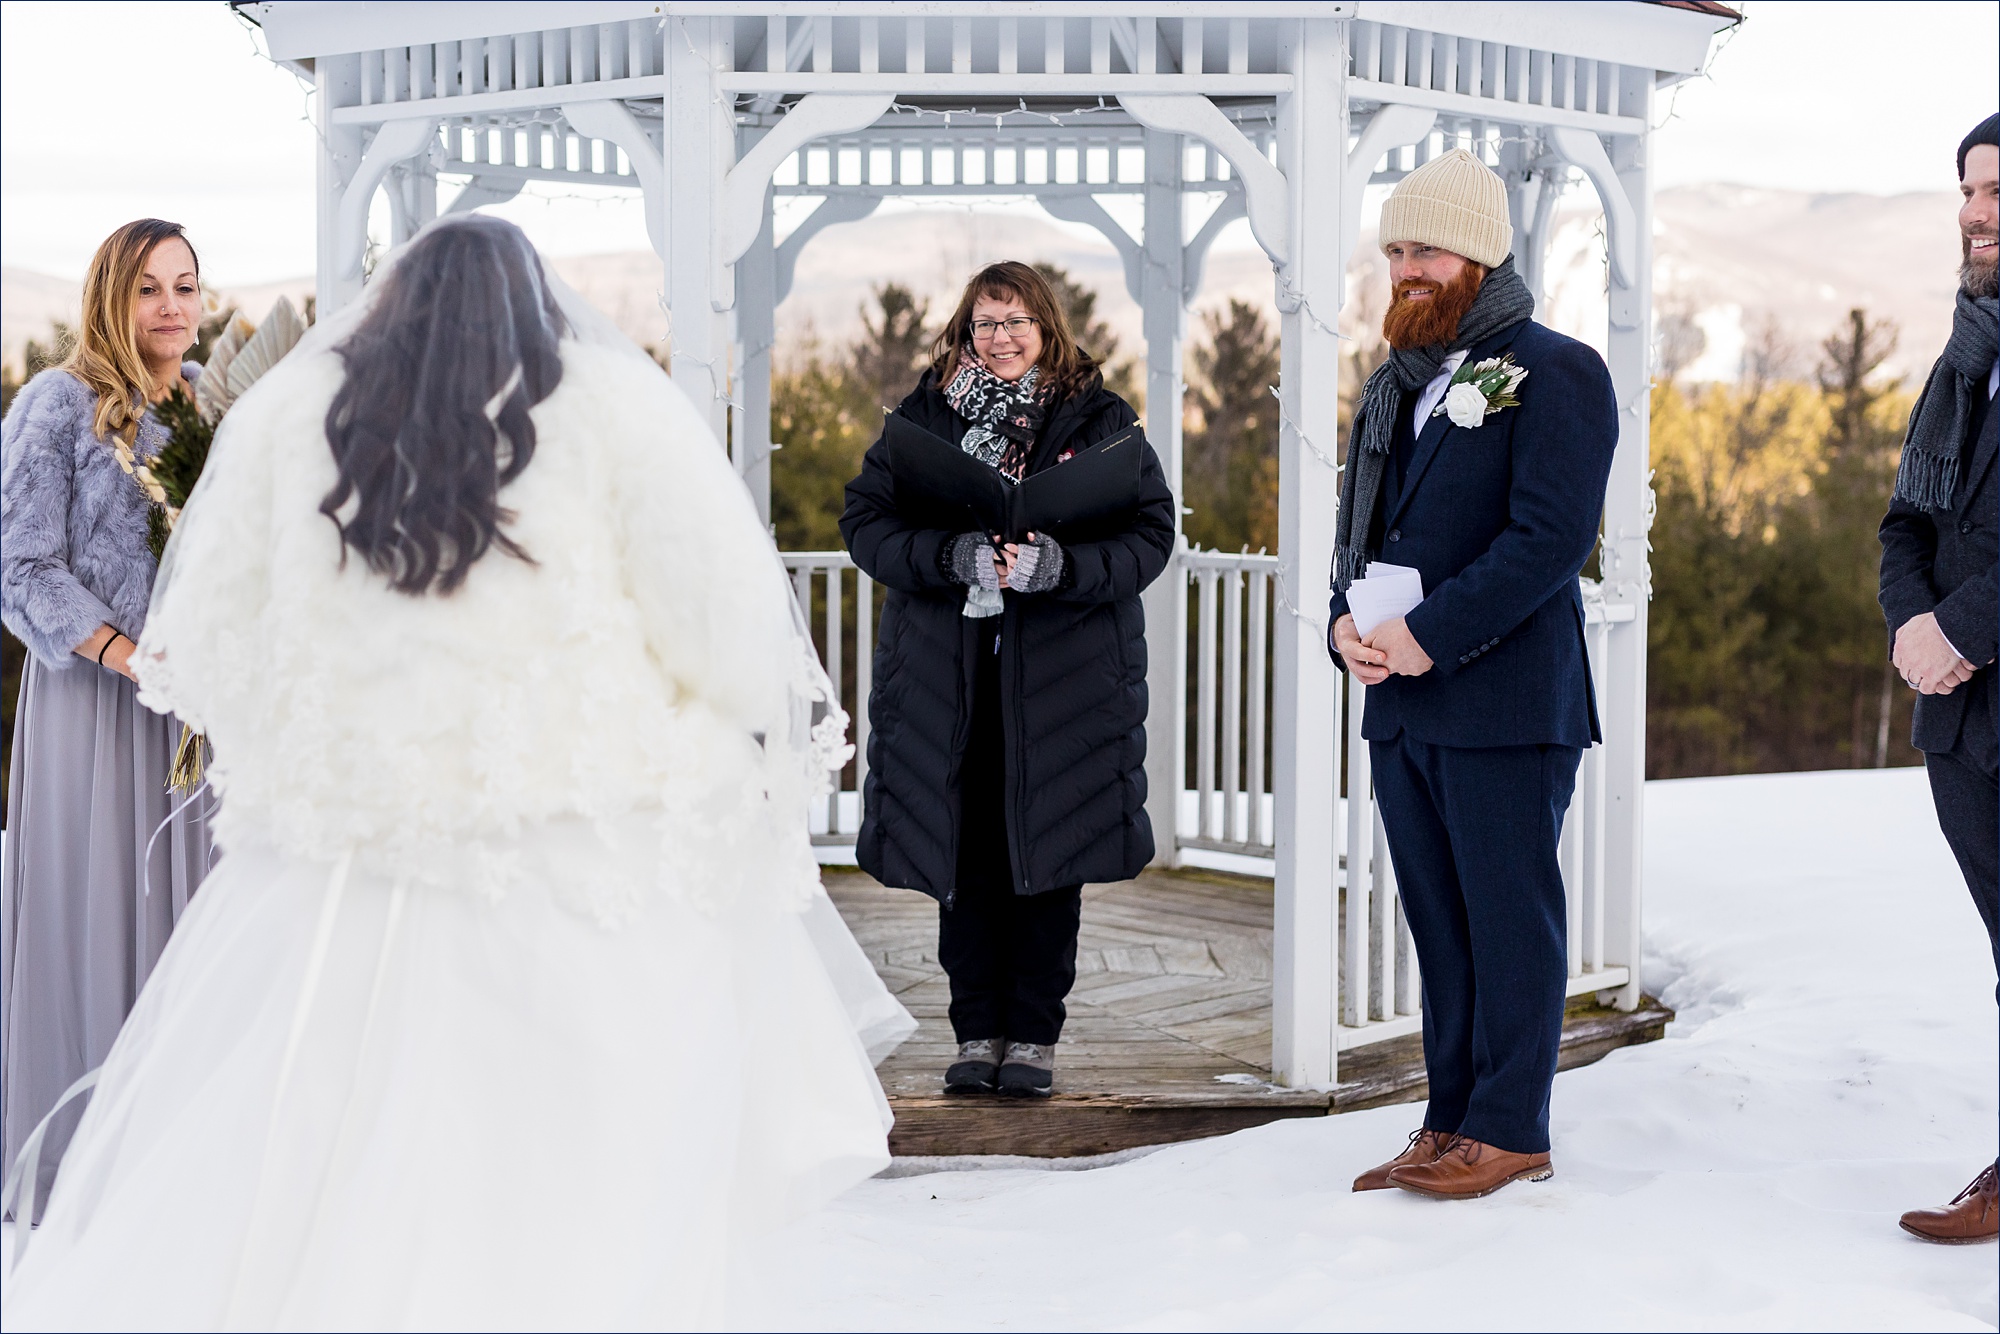 The bride heads to the groom for their winter ceremony outside in NH